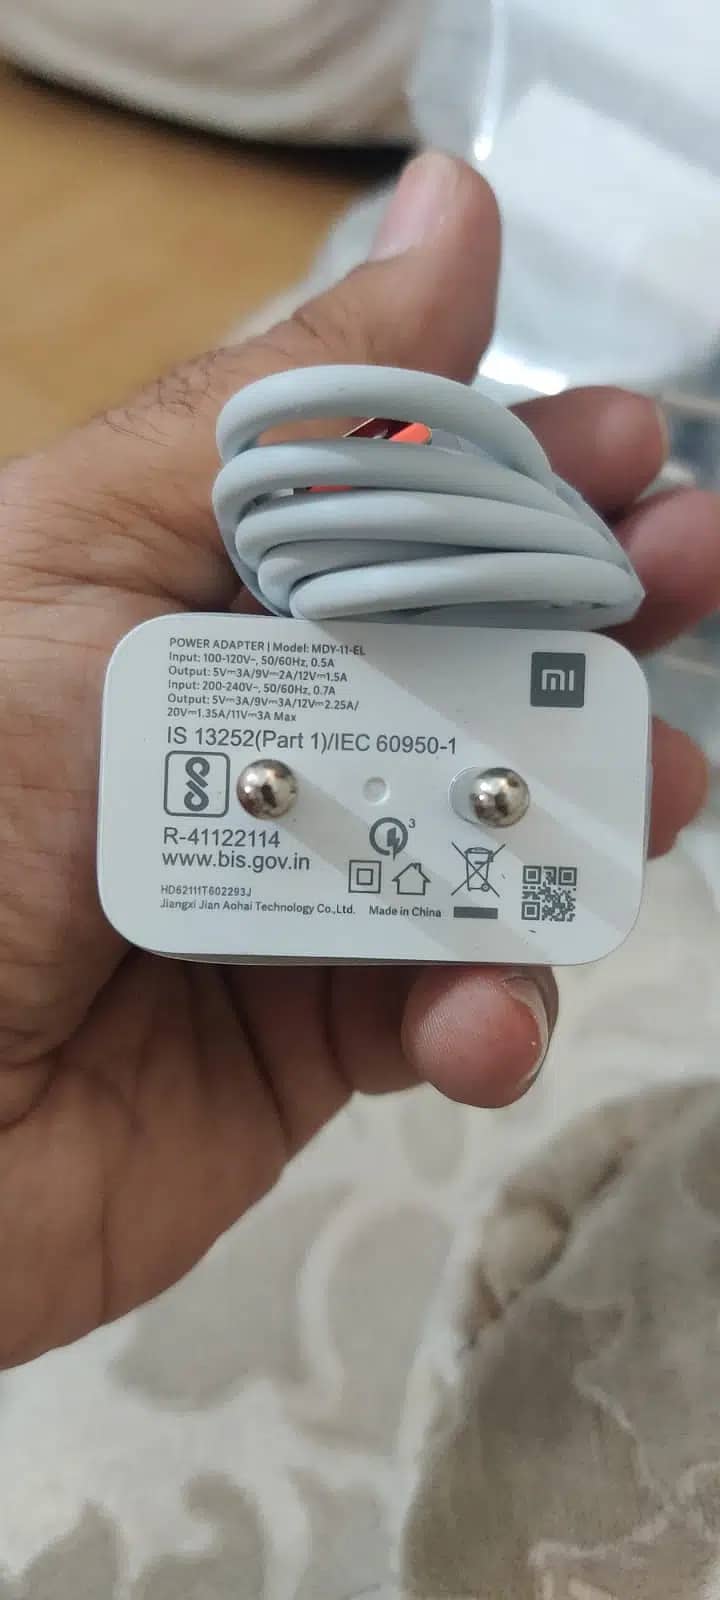 200% Original MI Charger 33W, One Plus Warp, Samsung Mobile Charger 0